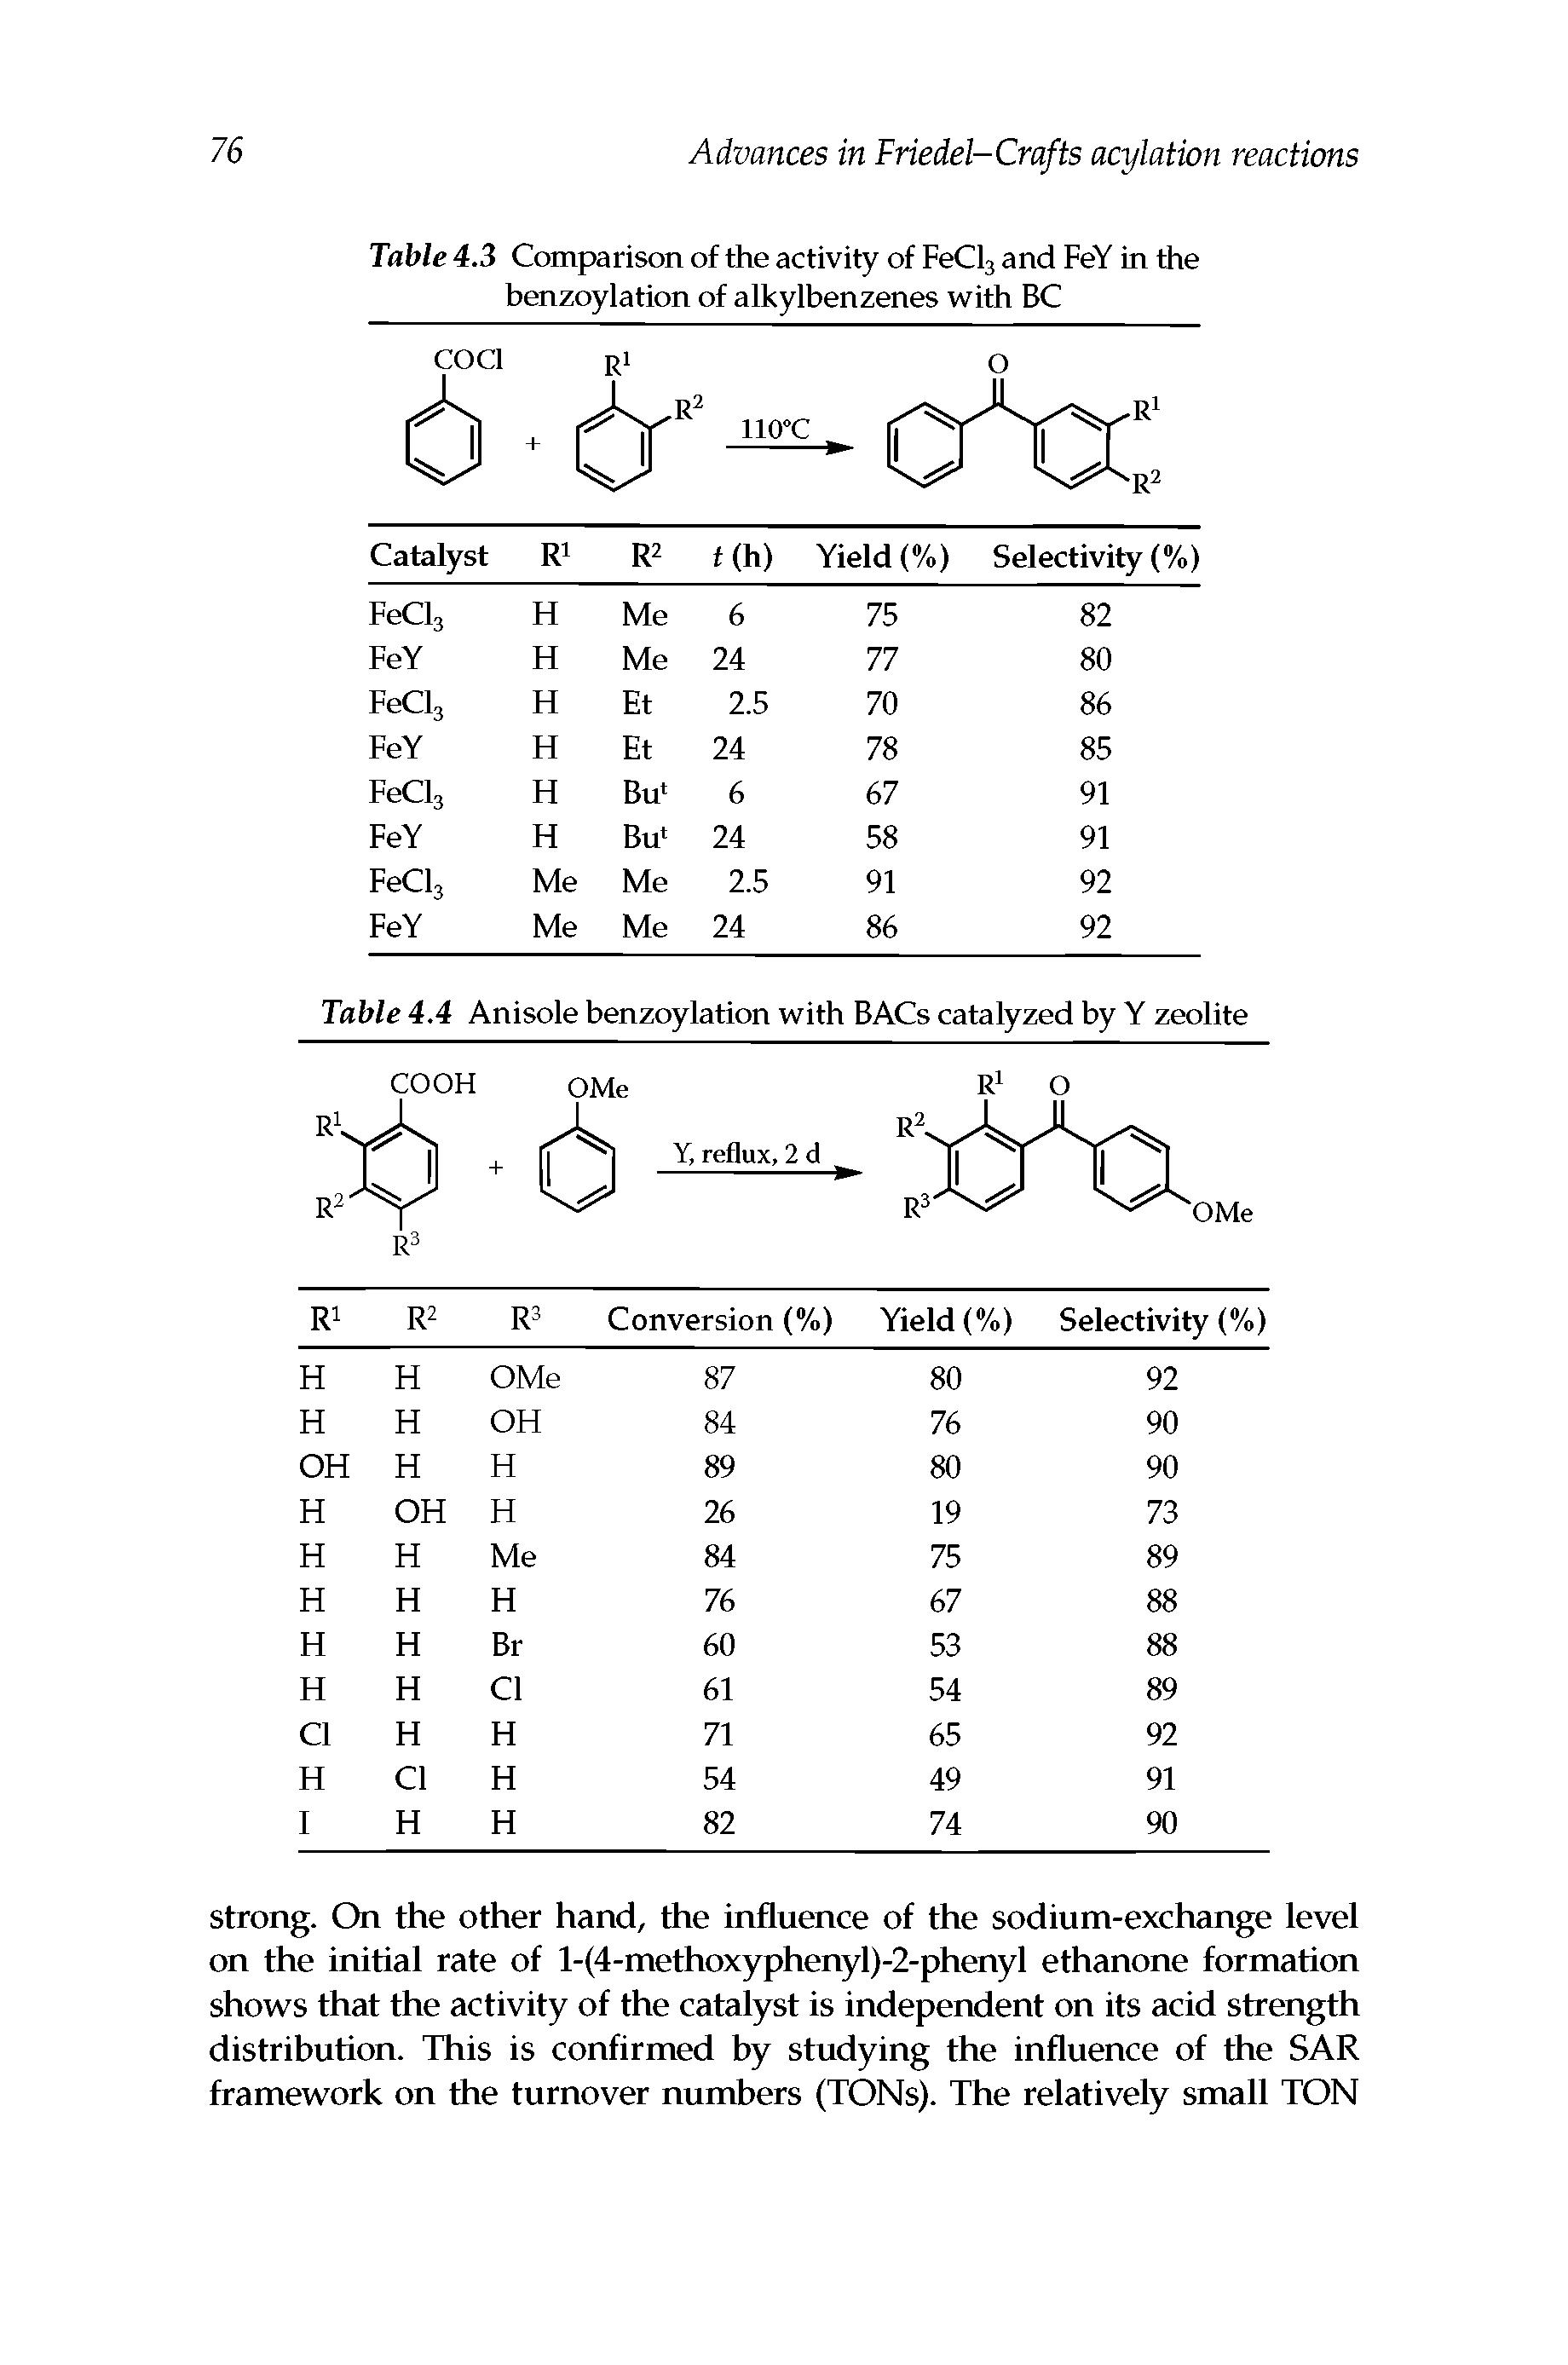 Table 4.3 Comparison of the activity of FeCl3 and FeY in the benzoylation of alkylbenzenes with BC...